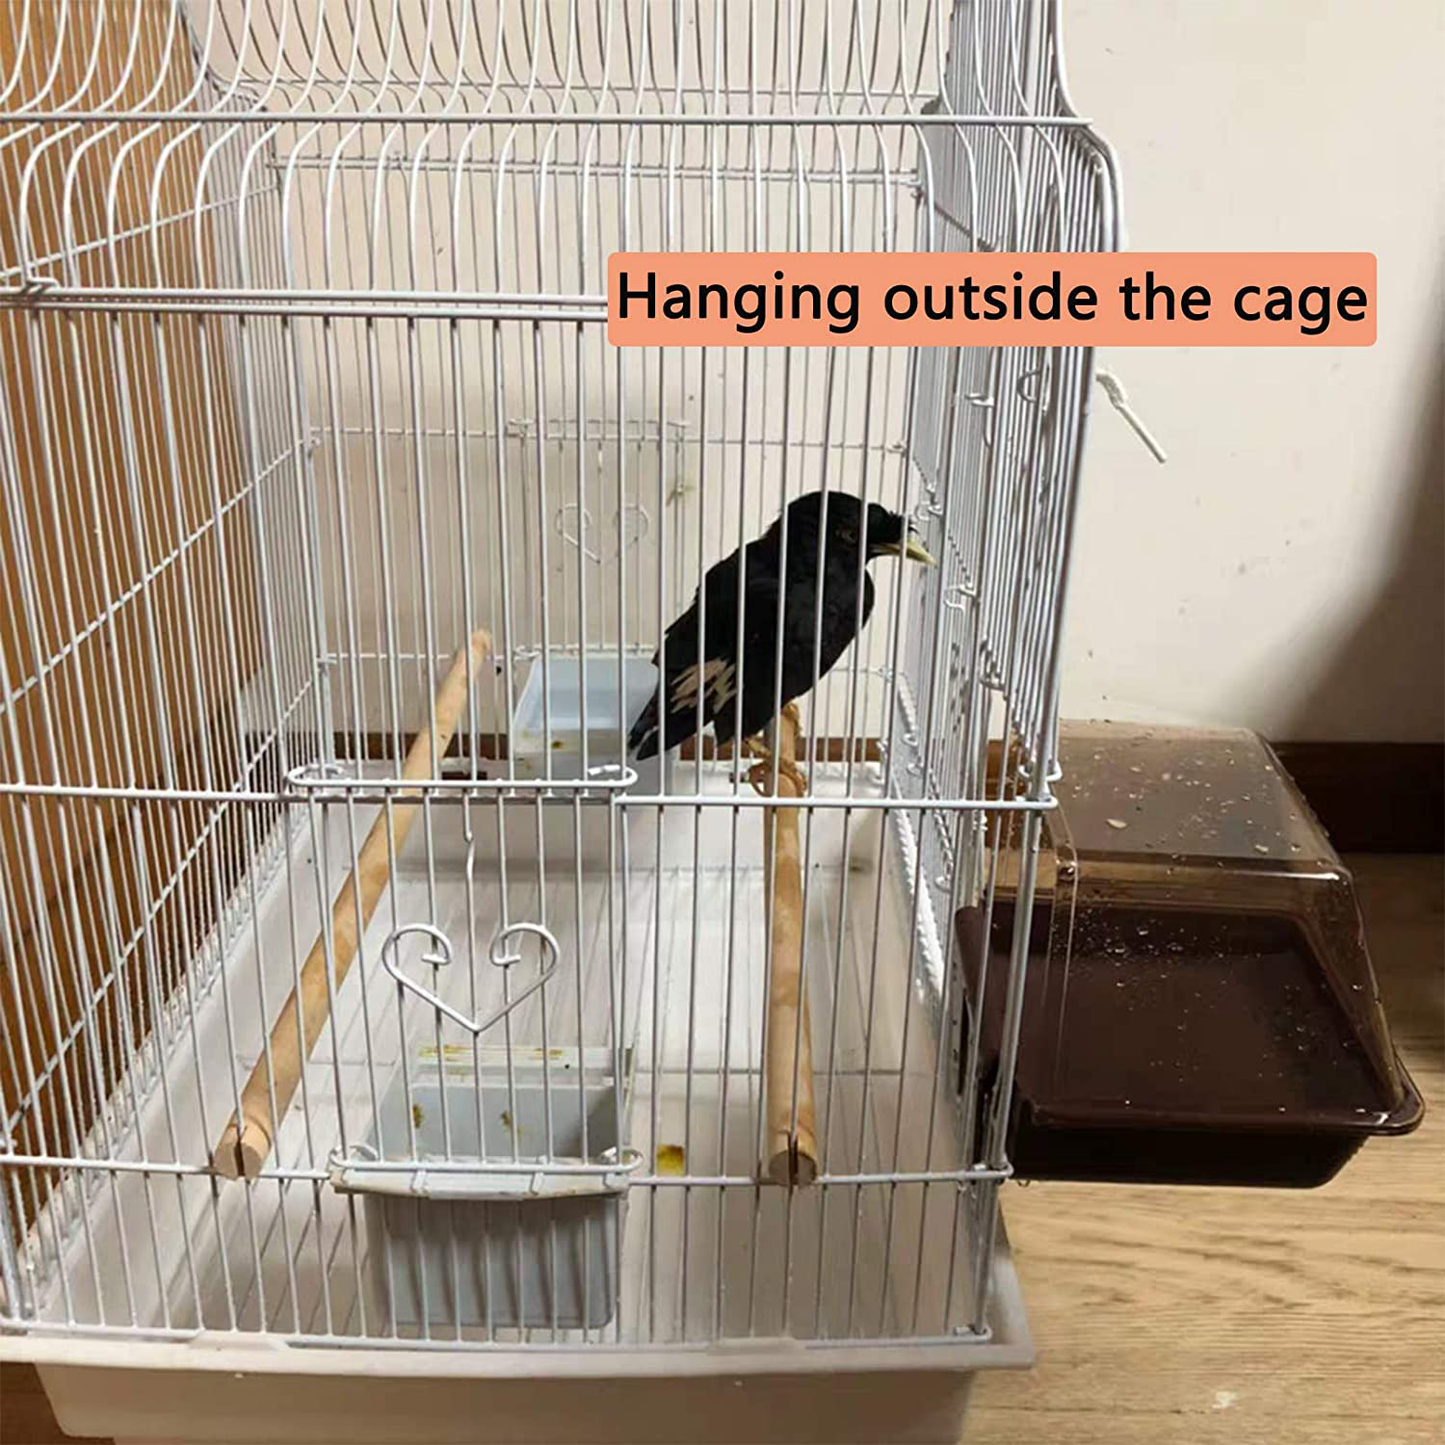 Parrot Bath Box Cage Multifunctional Bird Bathroom Foraging Systems Seed Clean Corral No Mess Feeder Water Cup Bird Accessory Bluebird Love Bird Parakeet 5.1 X 4.7 X 3.75 Inches Animals & Pet Supplies > Pet Supplies > Bird Supplies > Bird Cage Accessories Hamiledyi   